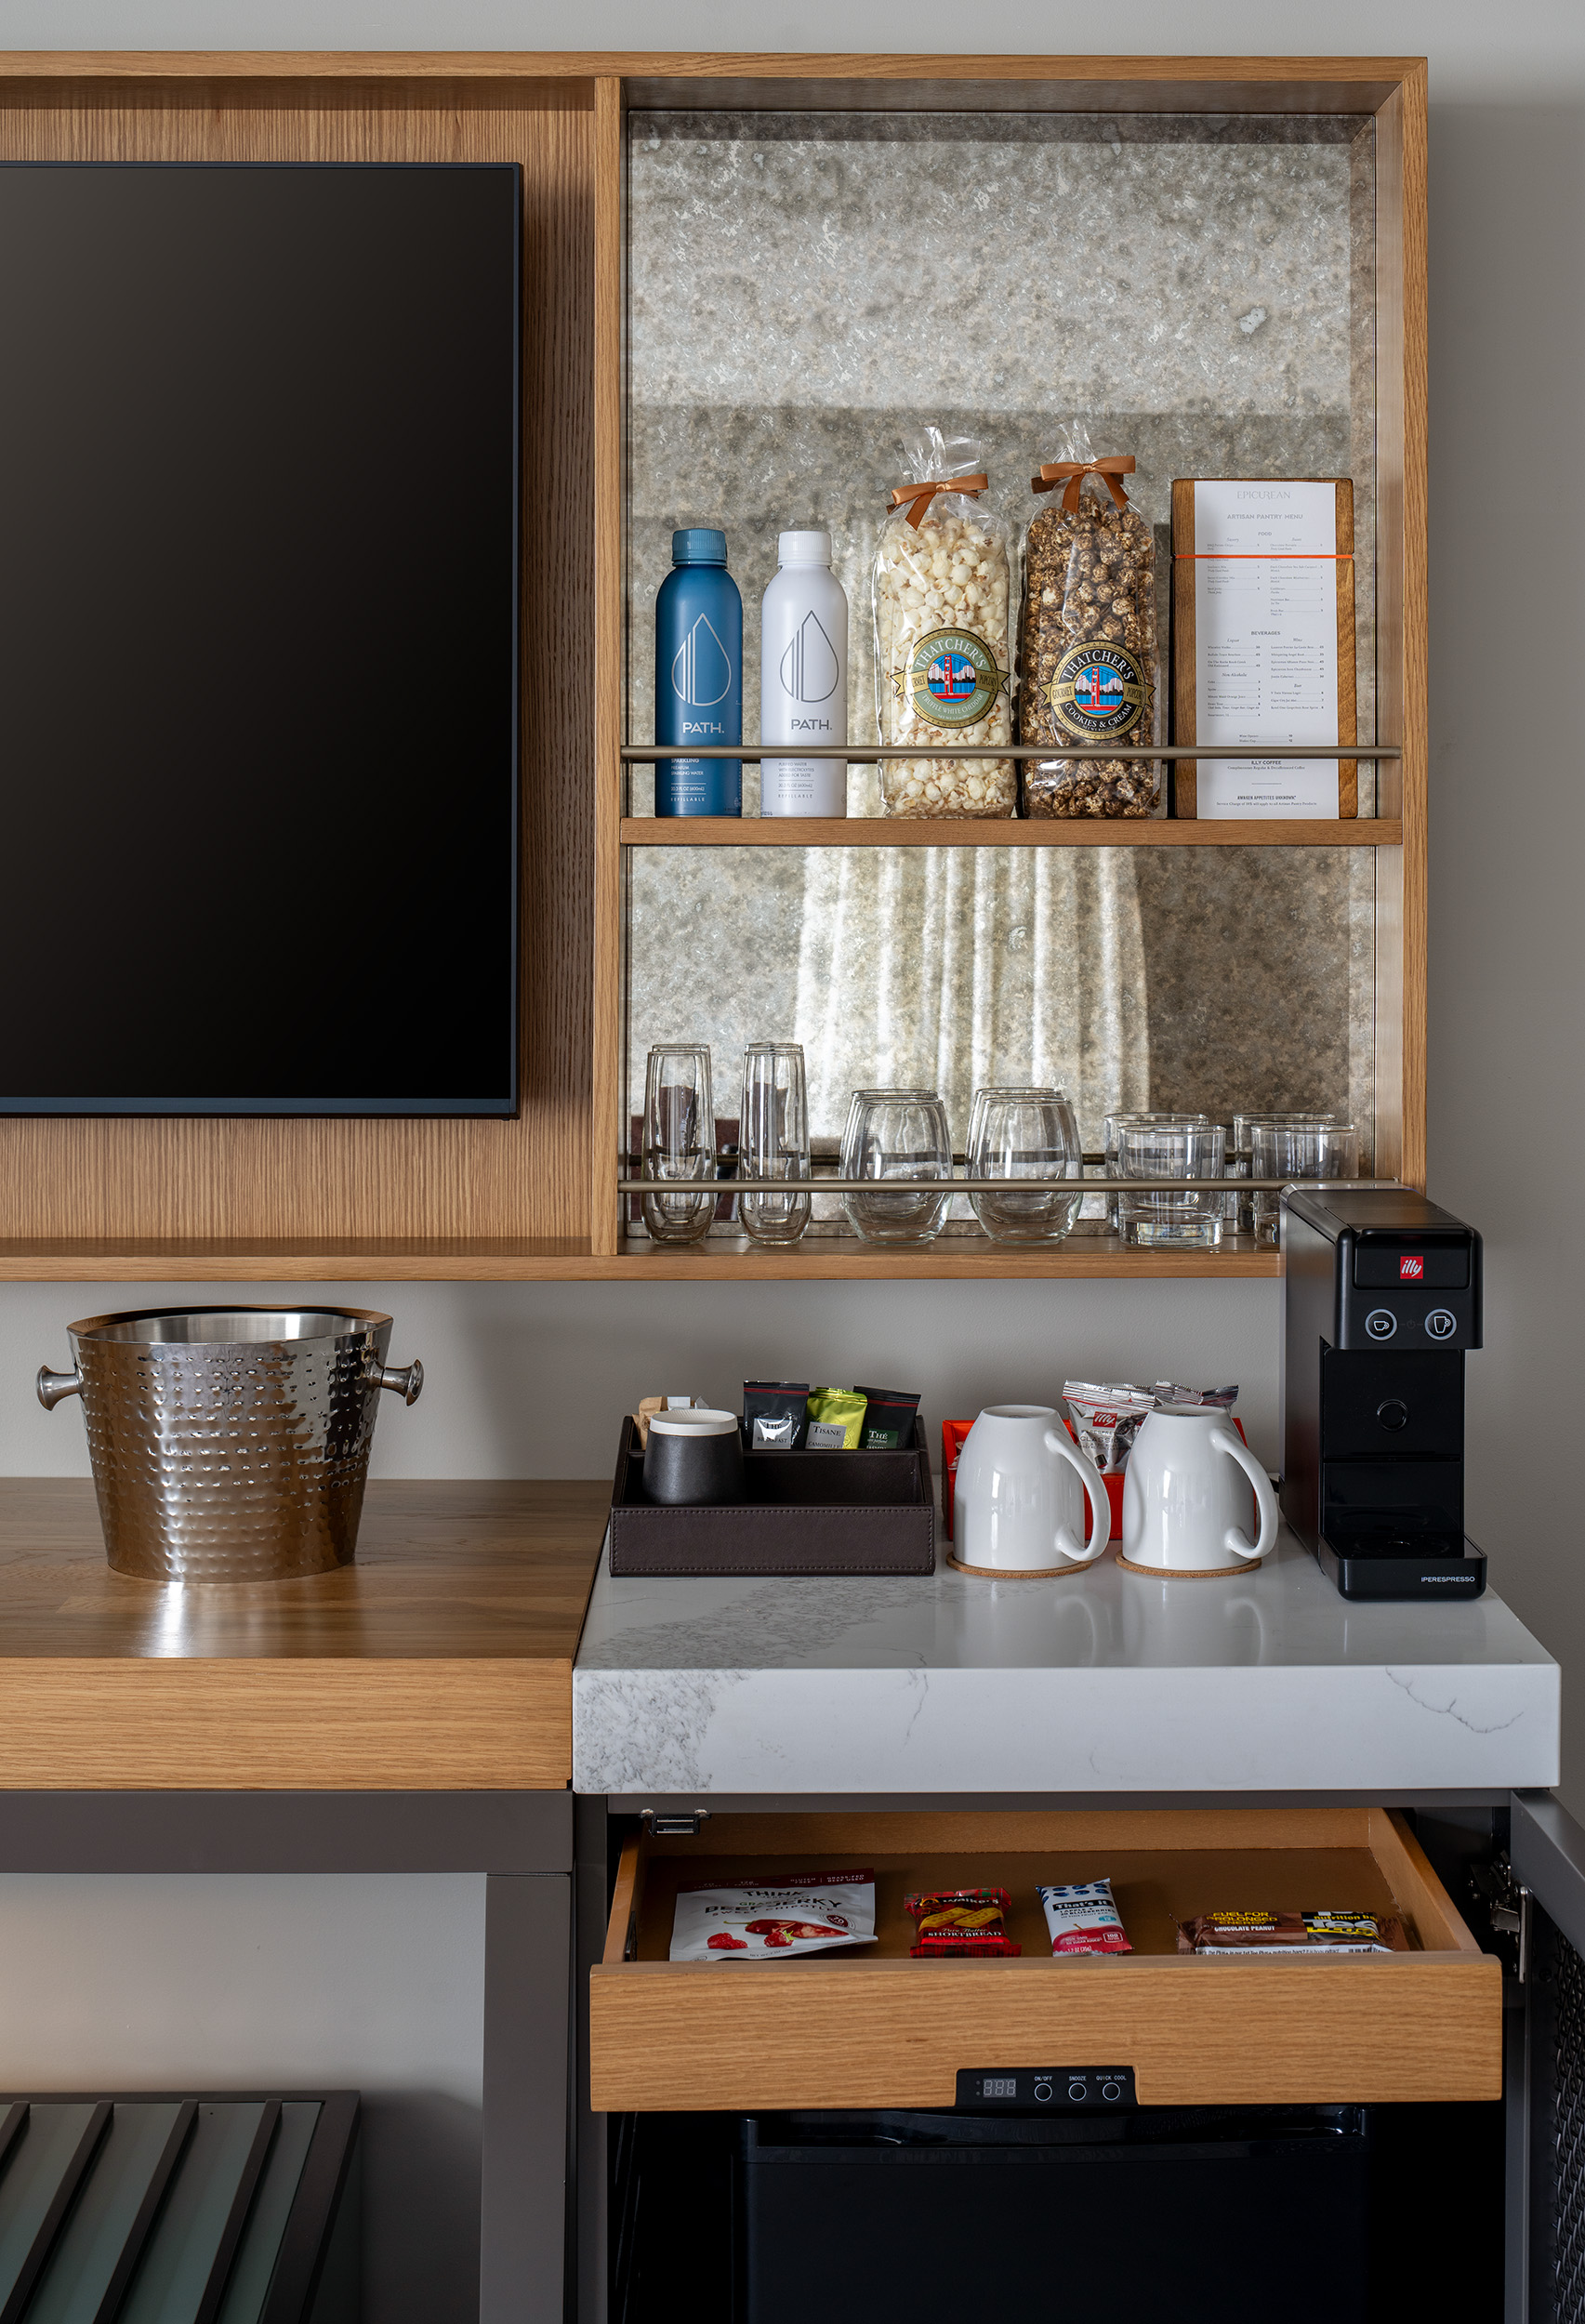 close up picture of hotel room artisan pantry with food and drink items, coffee maker and ice bucket